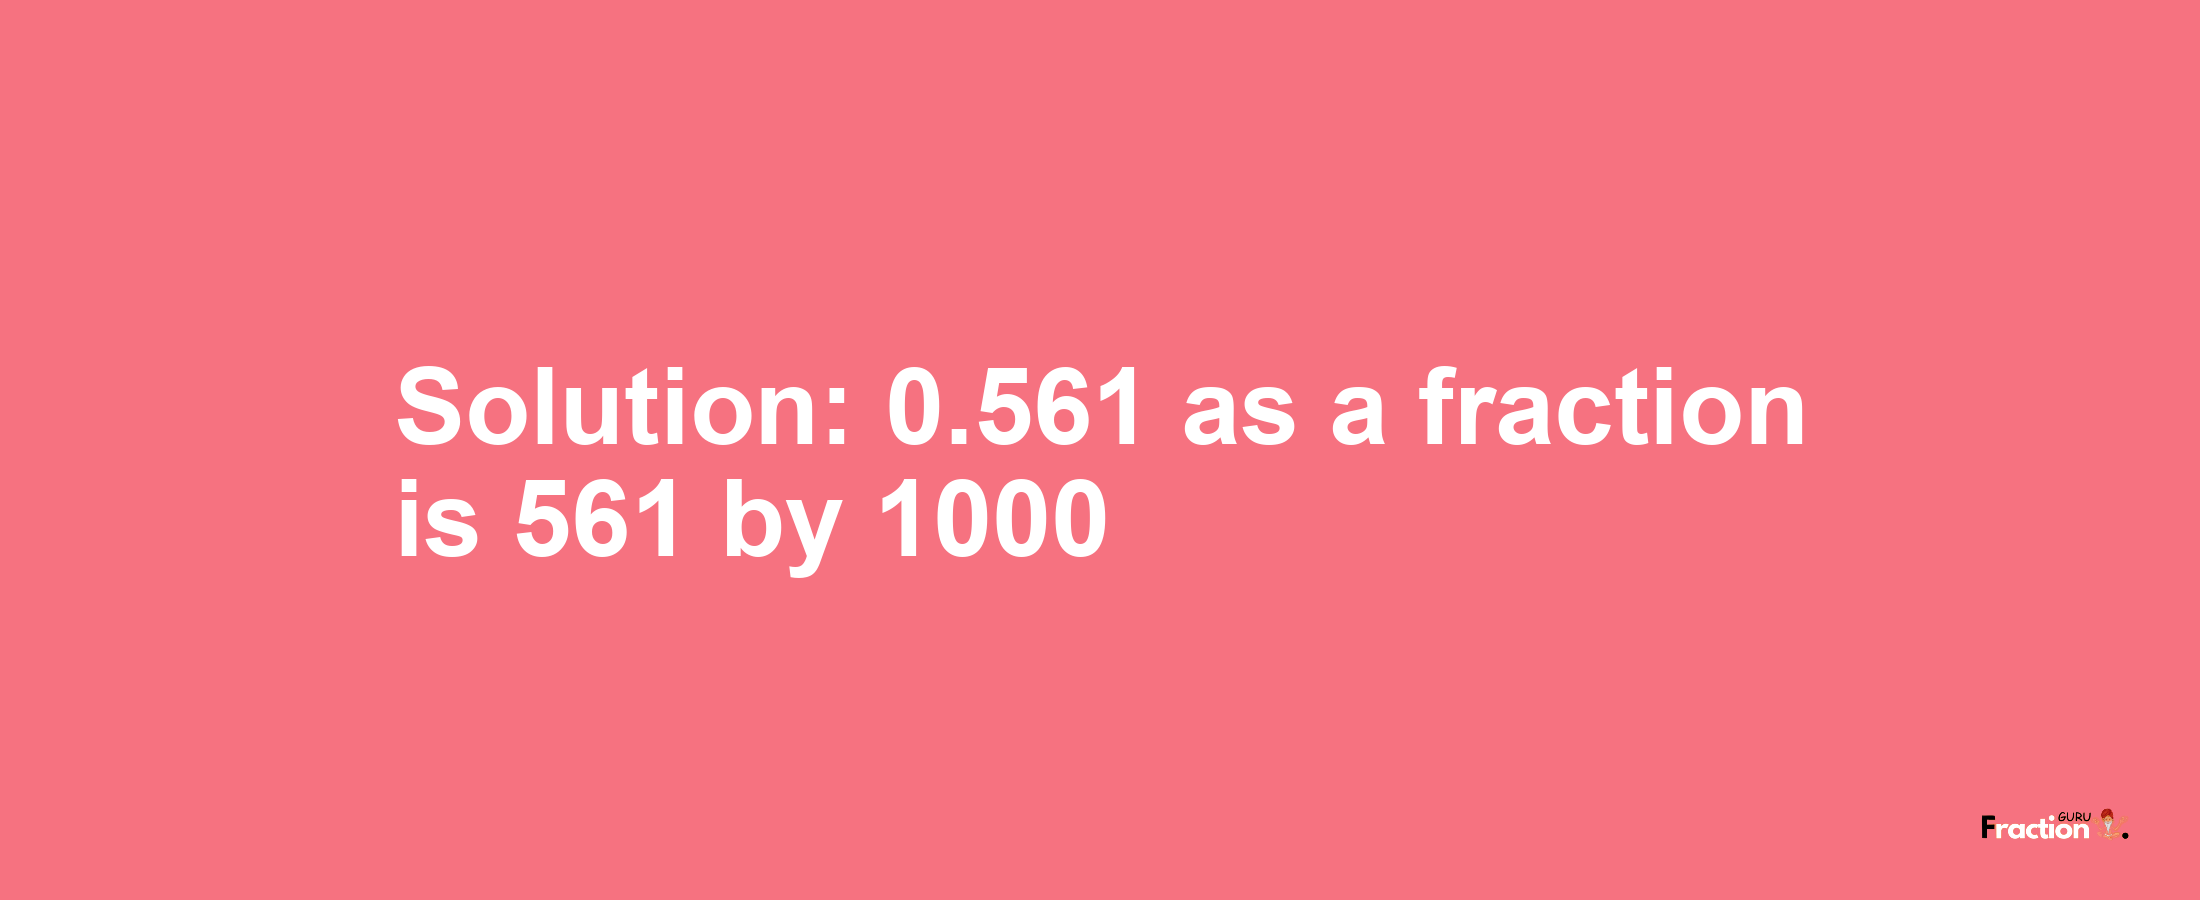 Solution:0.561 as a fraction is 561/1000